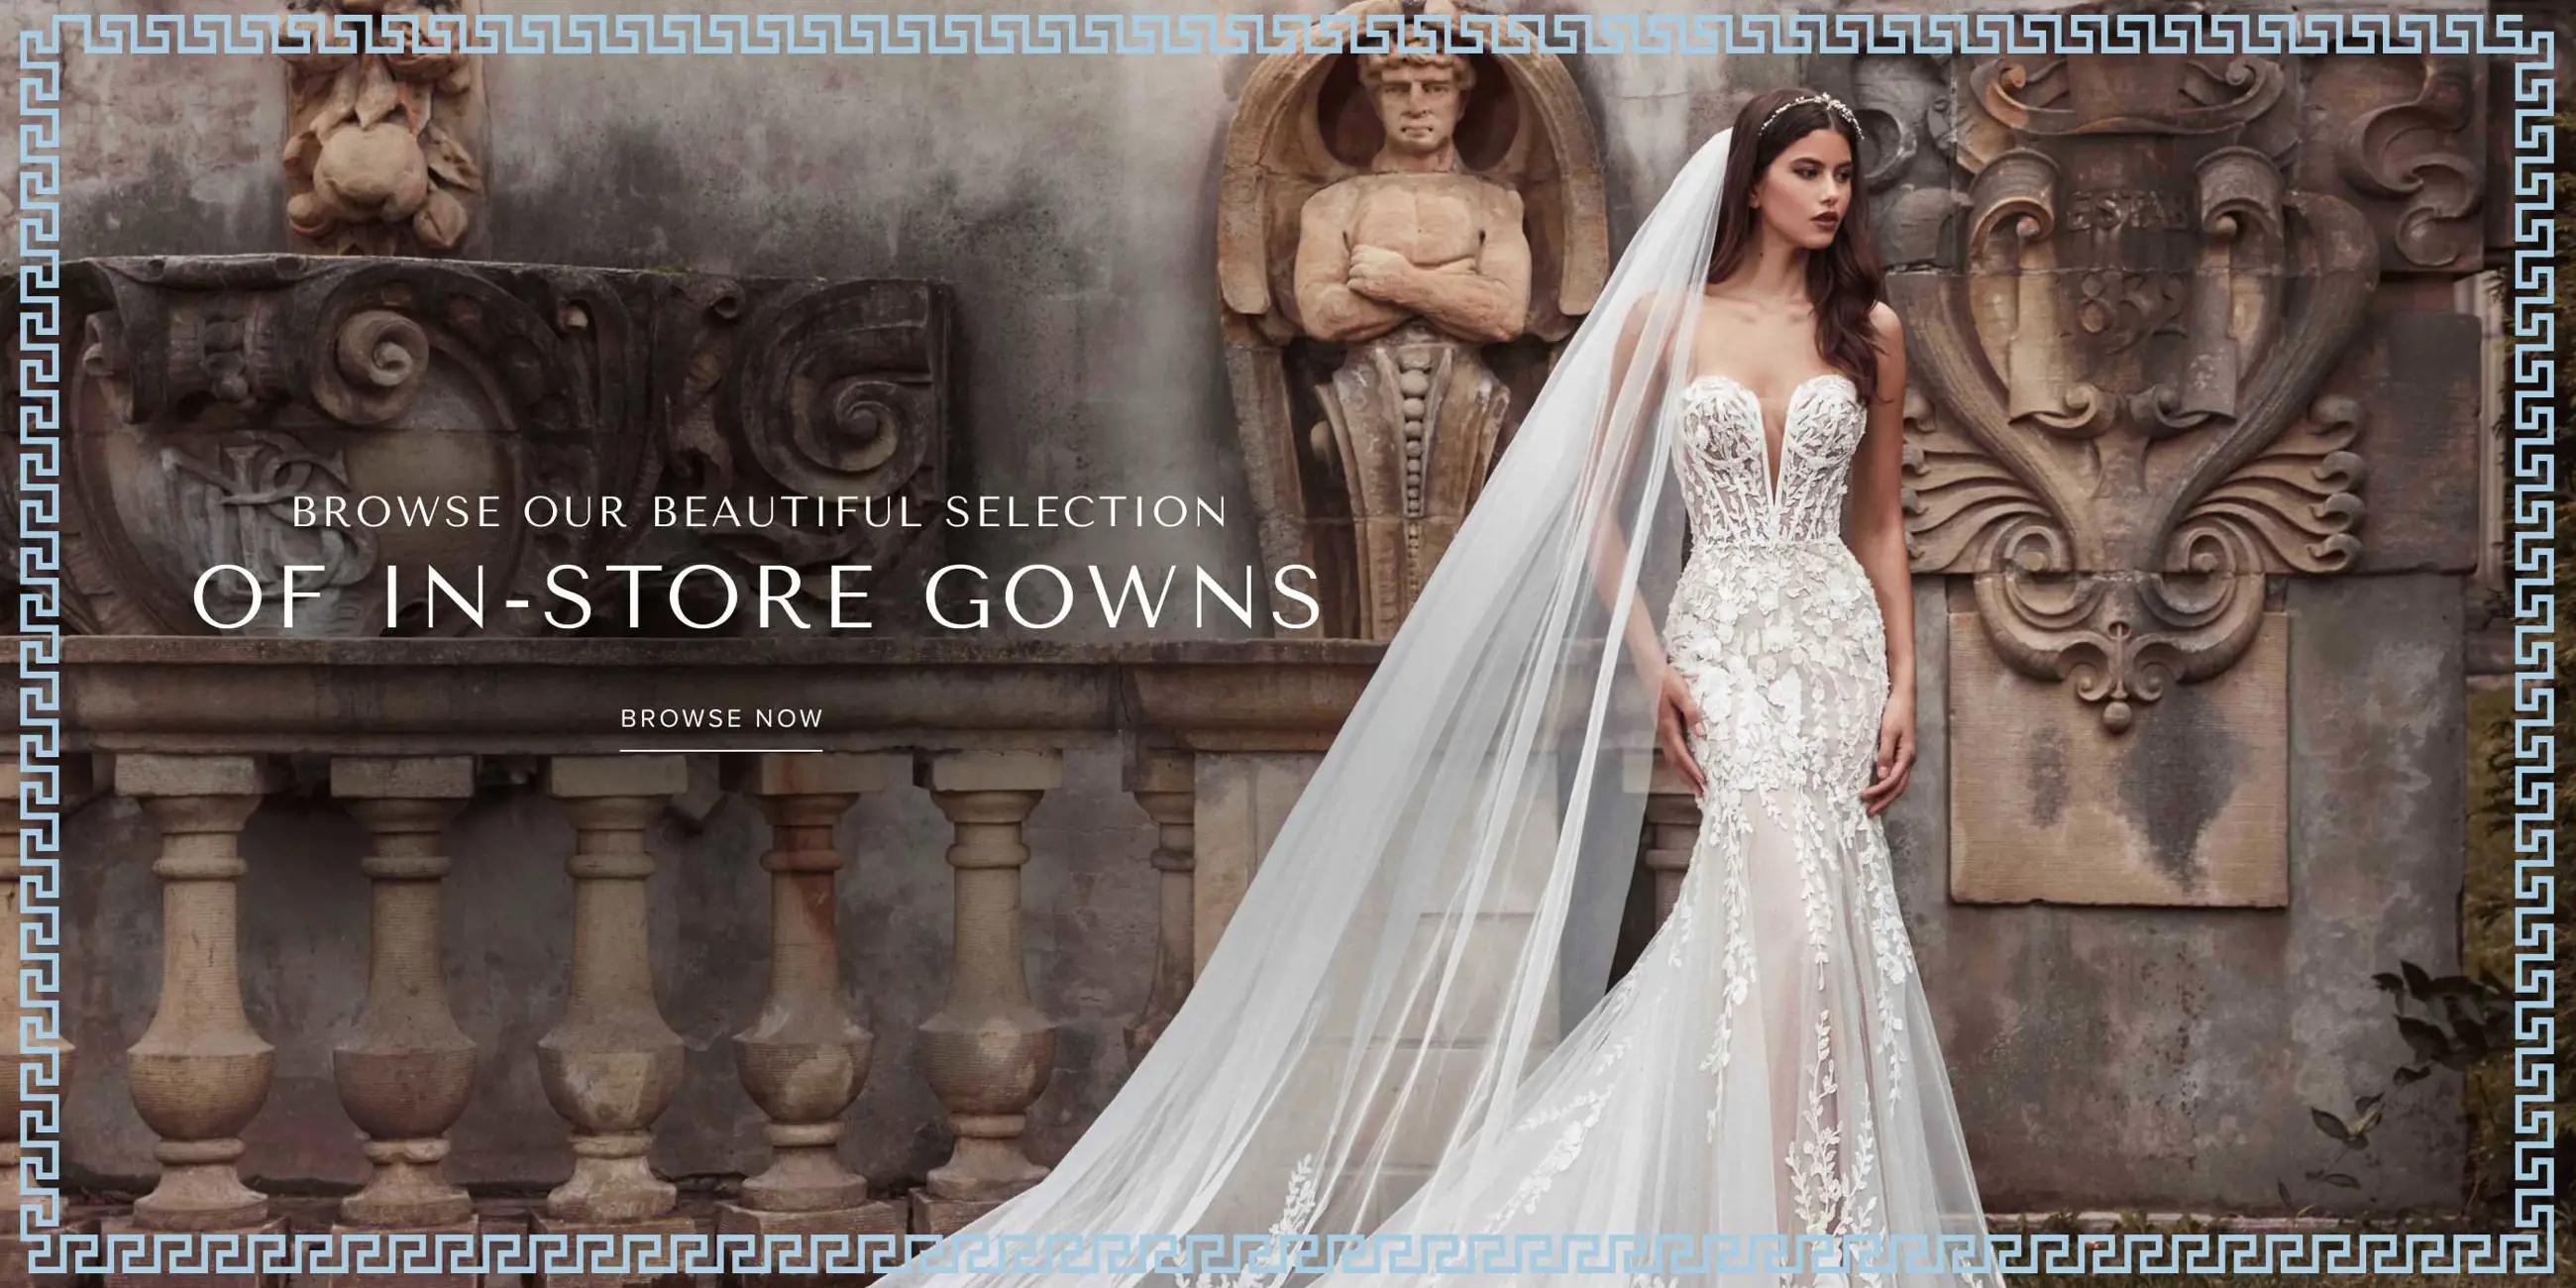 In-store gowns banner